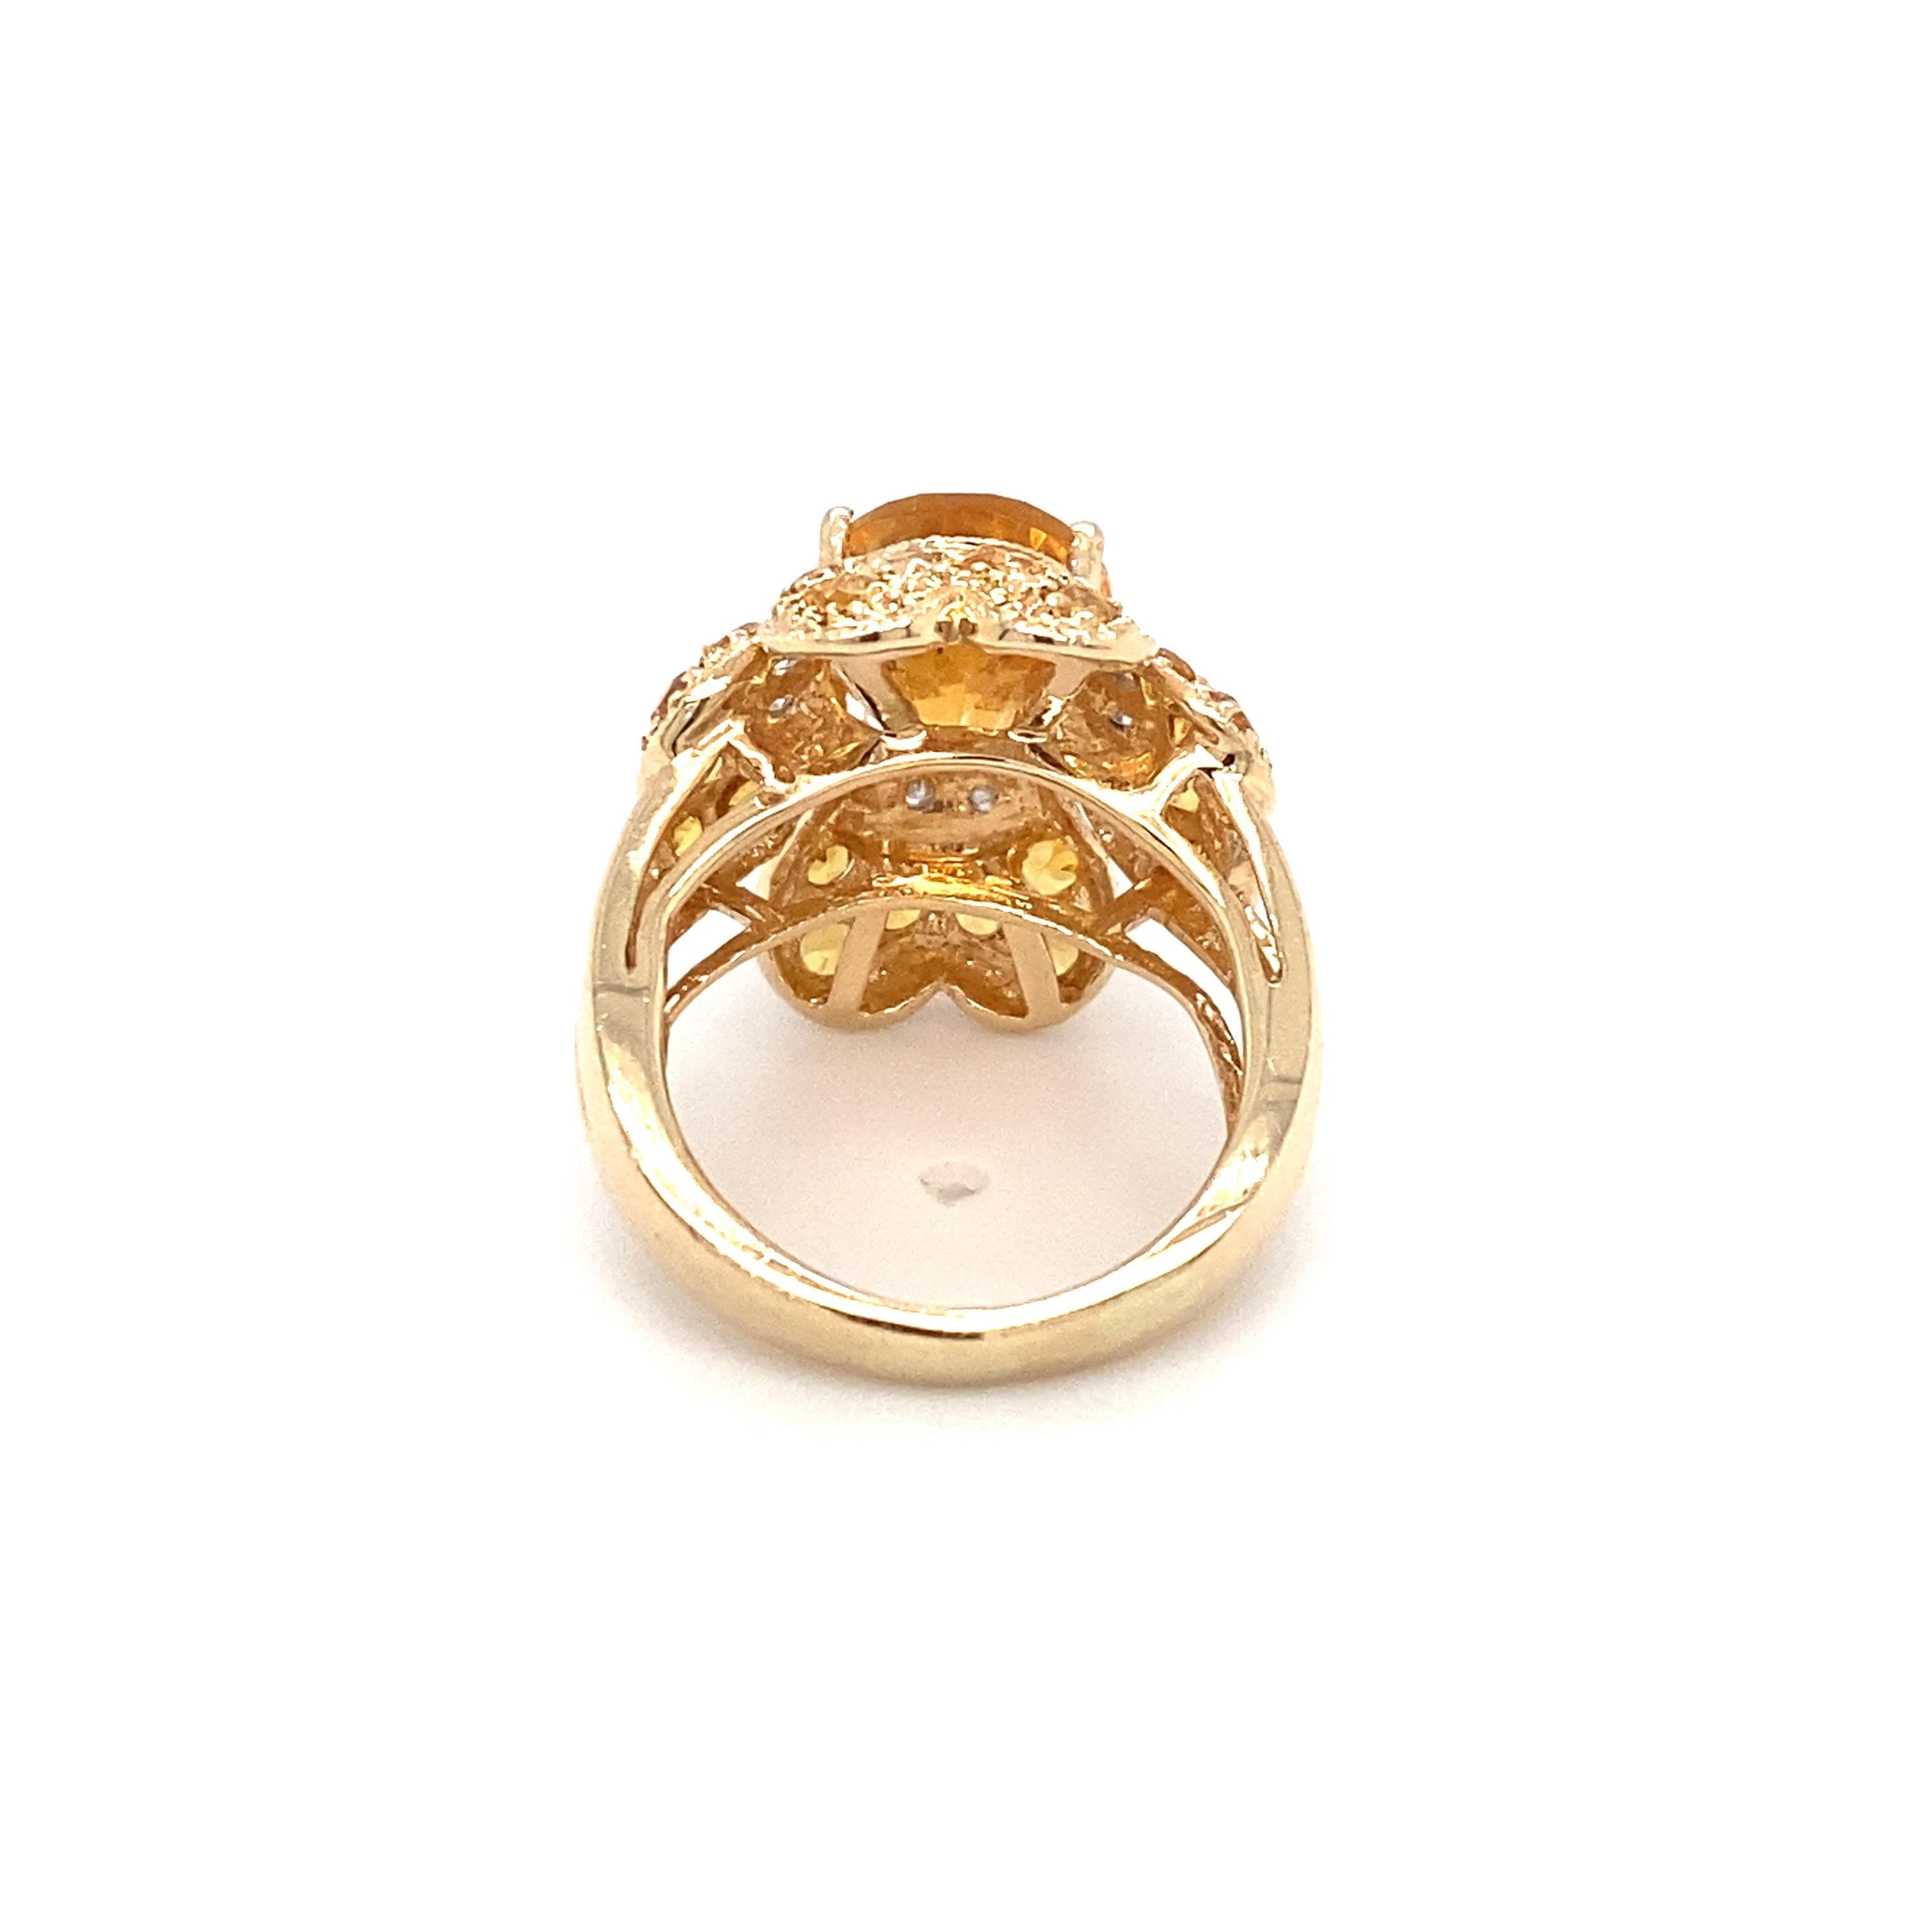 Item Details: This flower design ring has a beautiful center citrine with diamond and citrine accents.

Circa: 1990s
Metal Type: 14 Karat Yellow Gold 
Weight: 5.8 grams
Size: US 5, resizable

Diamond Details:

Carat: 0.15 carat total weight
Shape: